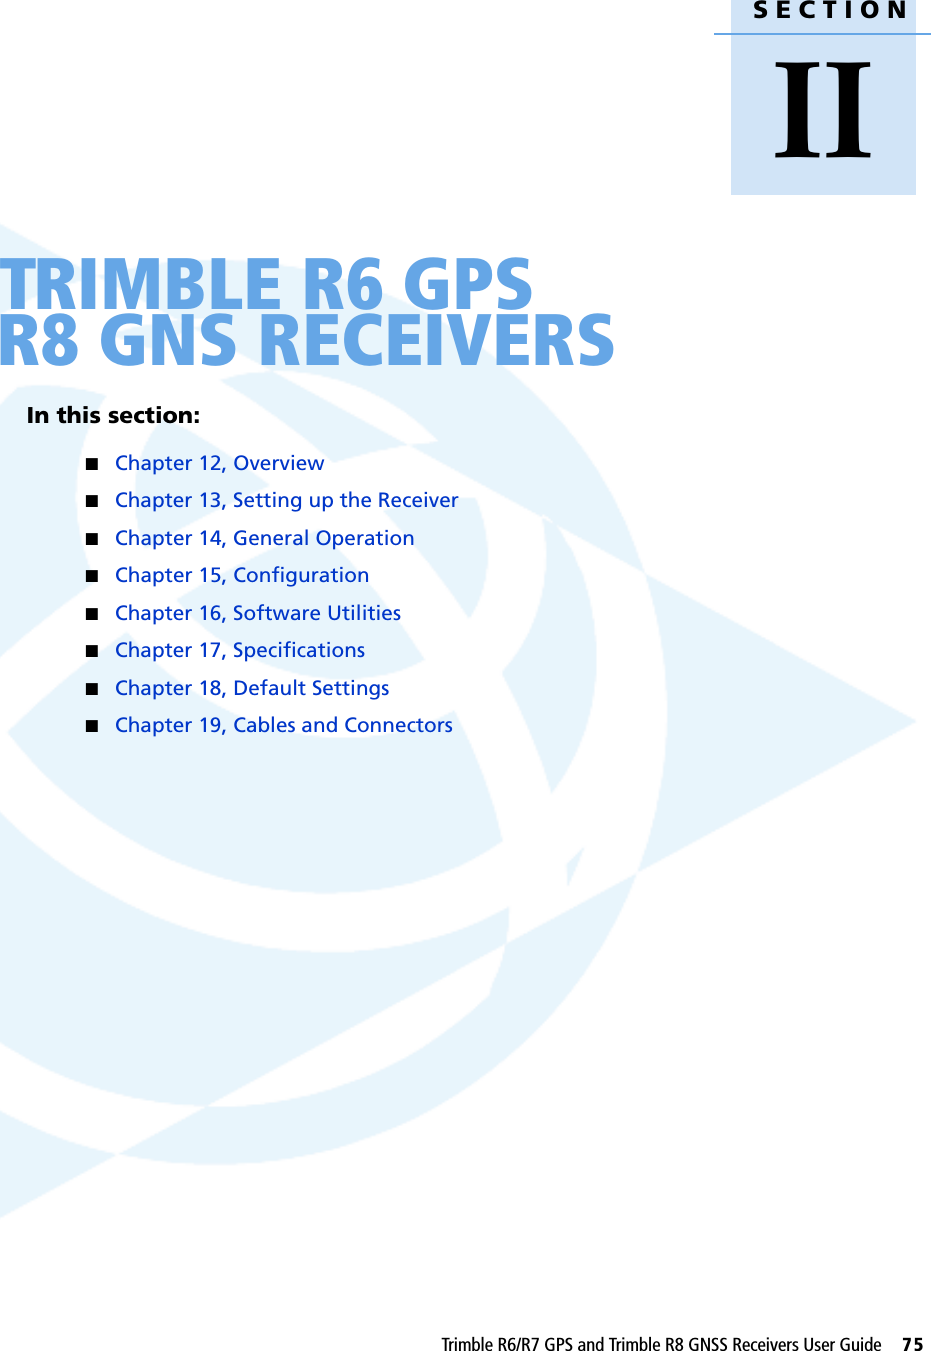 SECTIONIITrimble R6/R7 GPS and Trimble R8 GNSS Receivers User Guide     75IITRIMBLE R6 GPS R8 GNS RECEIVERSIn this section:QChapter 12, OverviewQChapter 13, Setting up the ReceiverQChapter 14, General OperationQChapter 15, ConfigurationQChapter 16, Software UtilitiesQChapter 17, SpecificationsQChapter 18, Default SettingsQChapter 19, Cables and Connectors